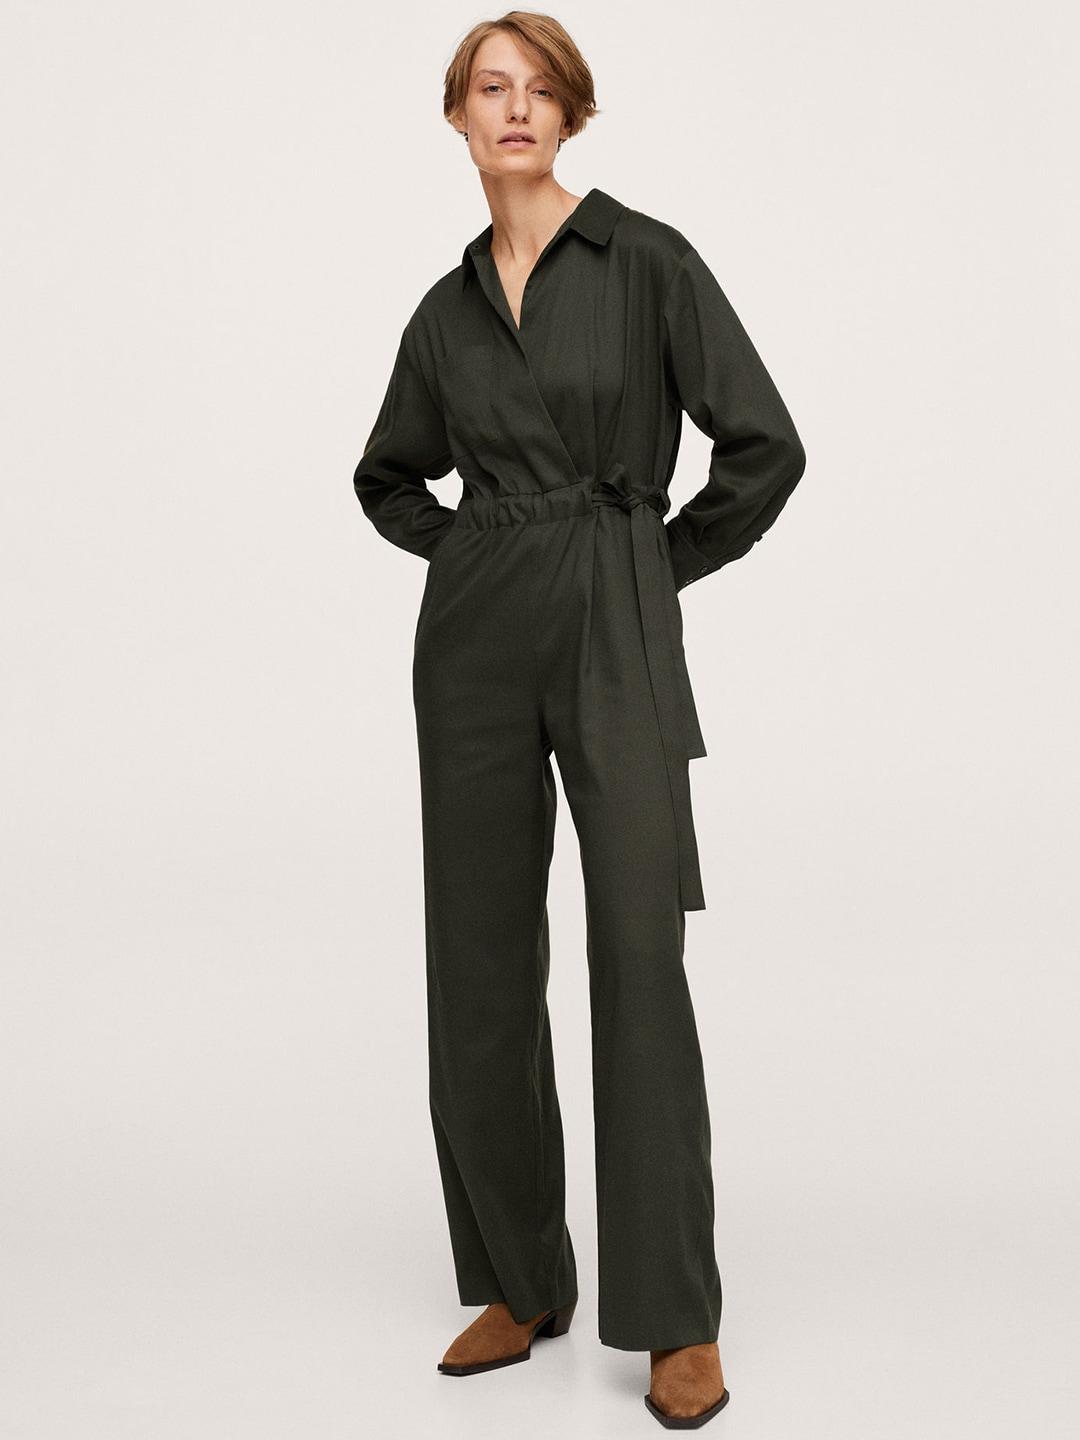 mango-green-solid-pu-basic-jumpsuit-with-waist-tie-up